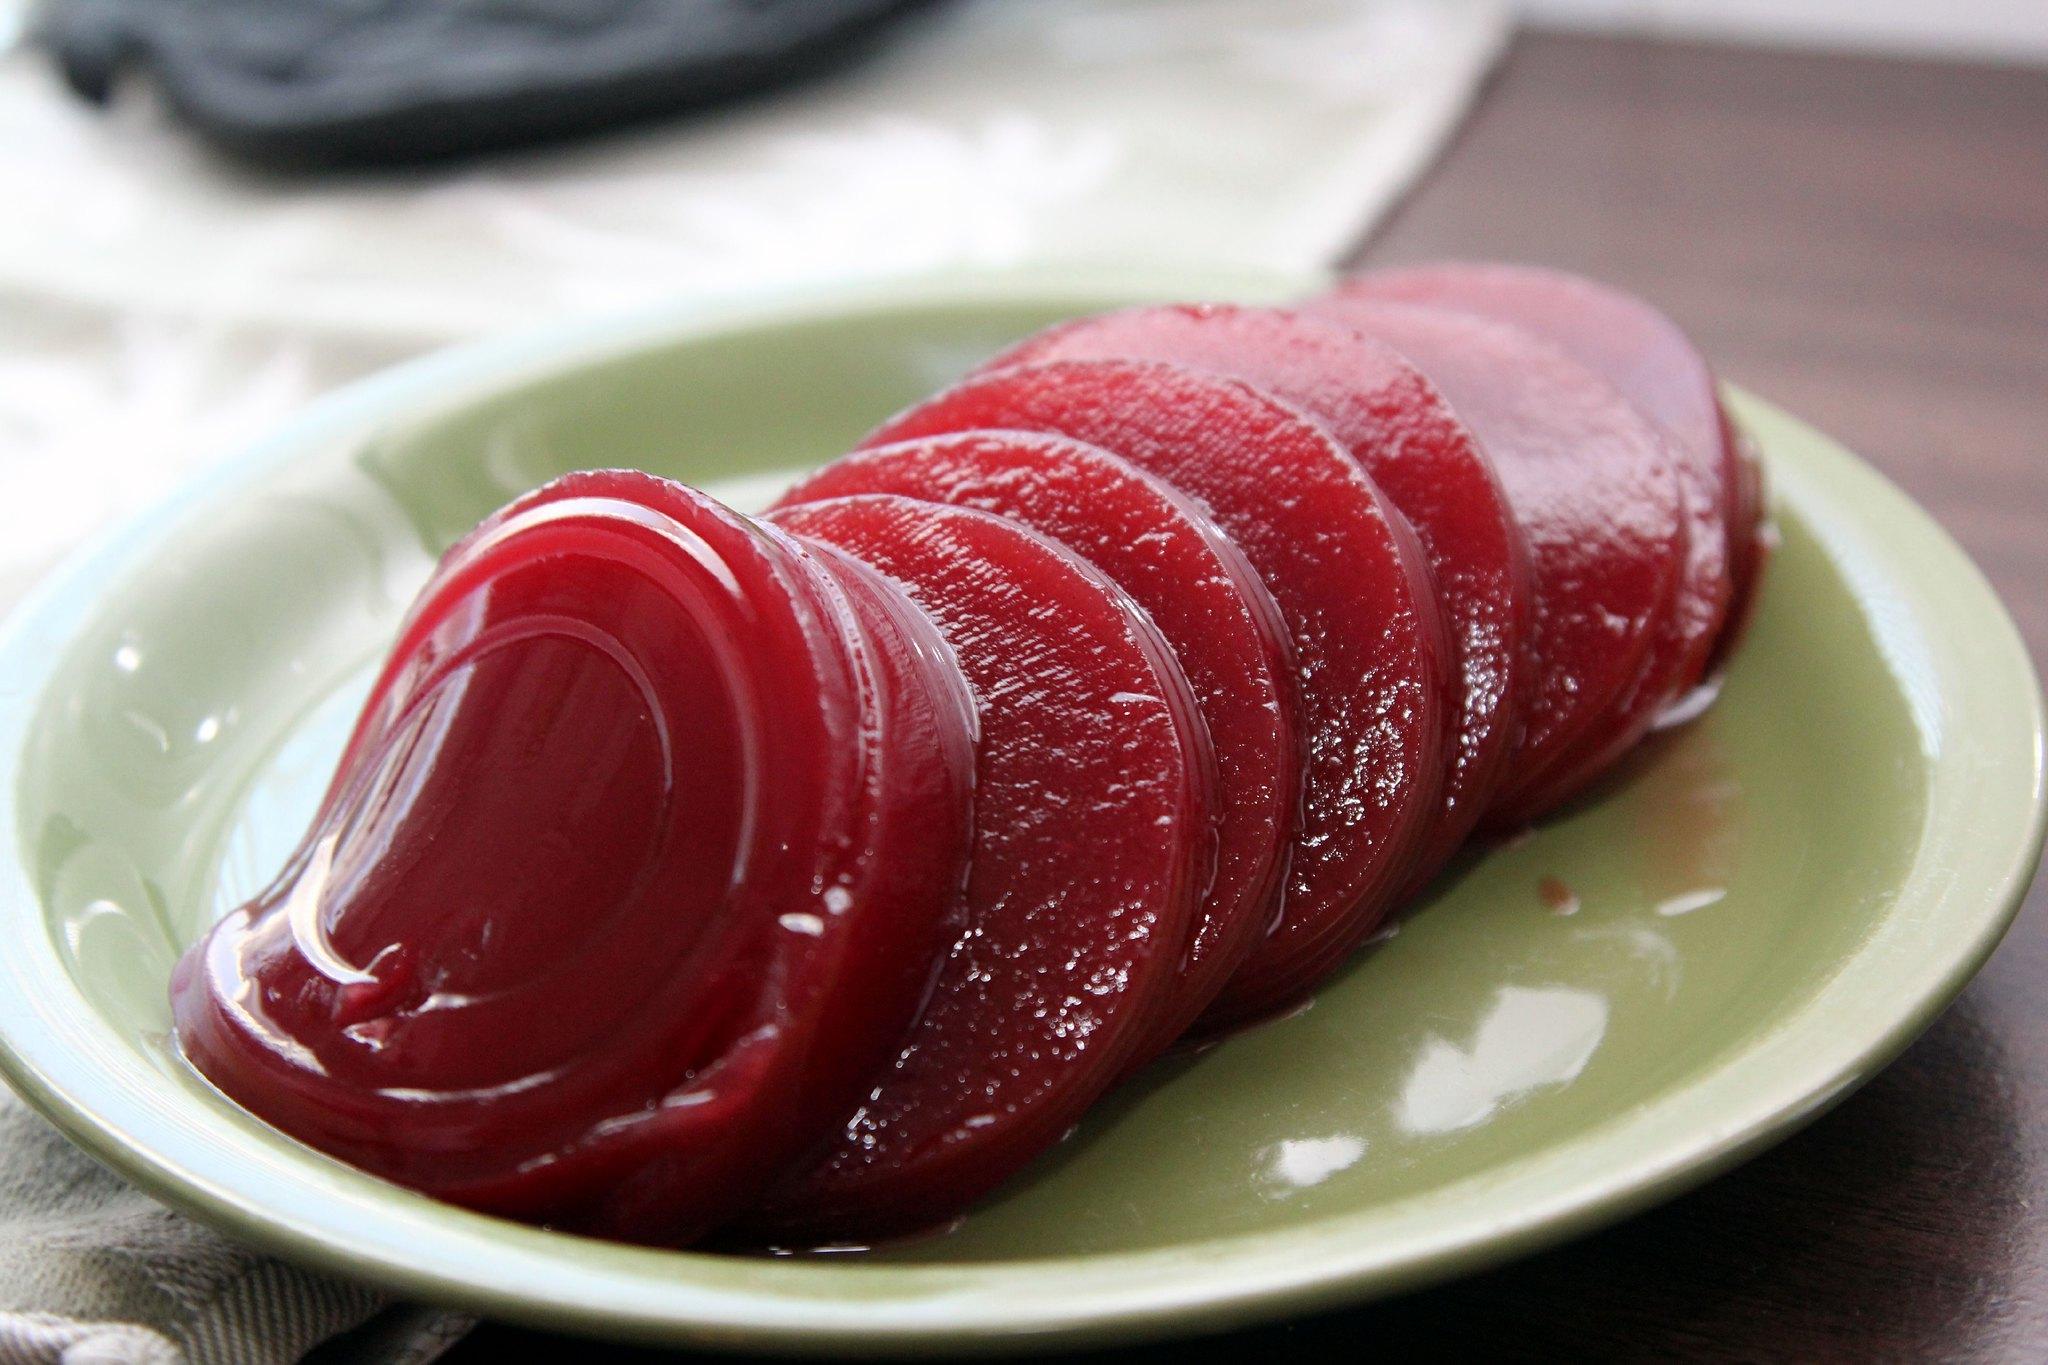 Canned cranberry sauce